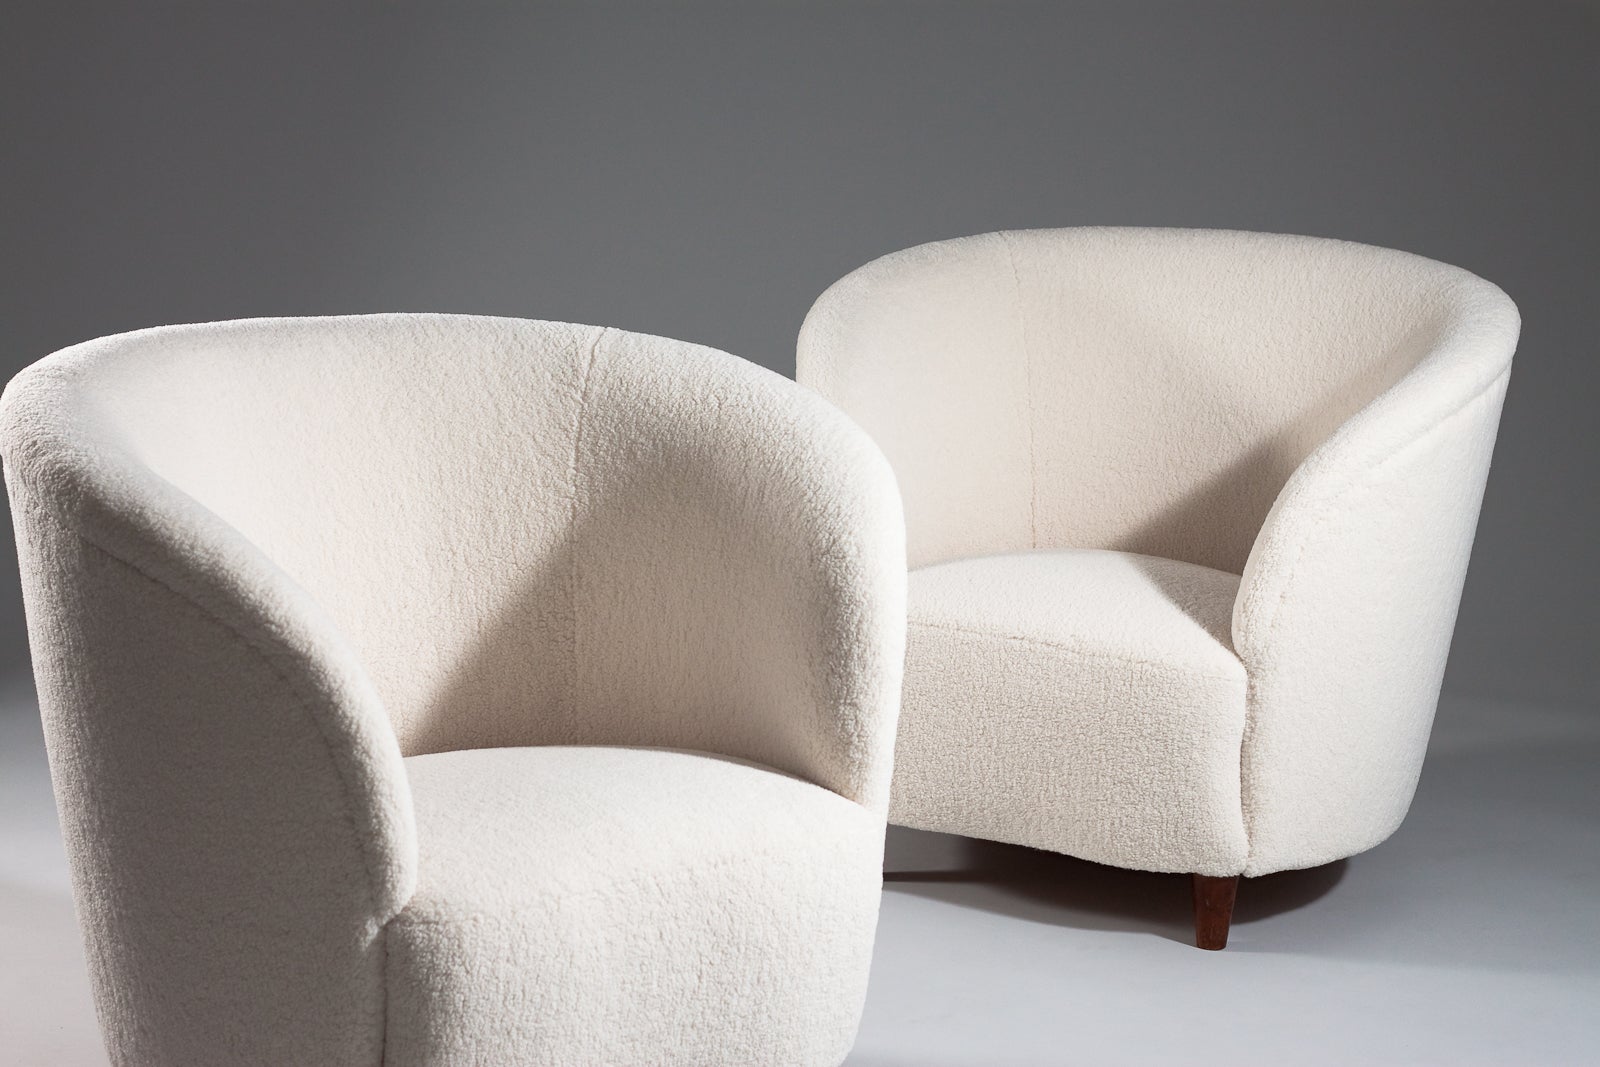 This rare pair of Scandinavian Modern lounge chairs are upholstered in a sheepskin-like quality fabric. The lounge chairs are in a perfect Size and manner to be included in any high-end interior design. The chairs have not been used after